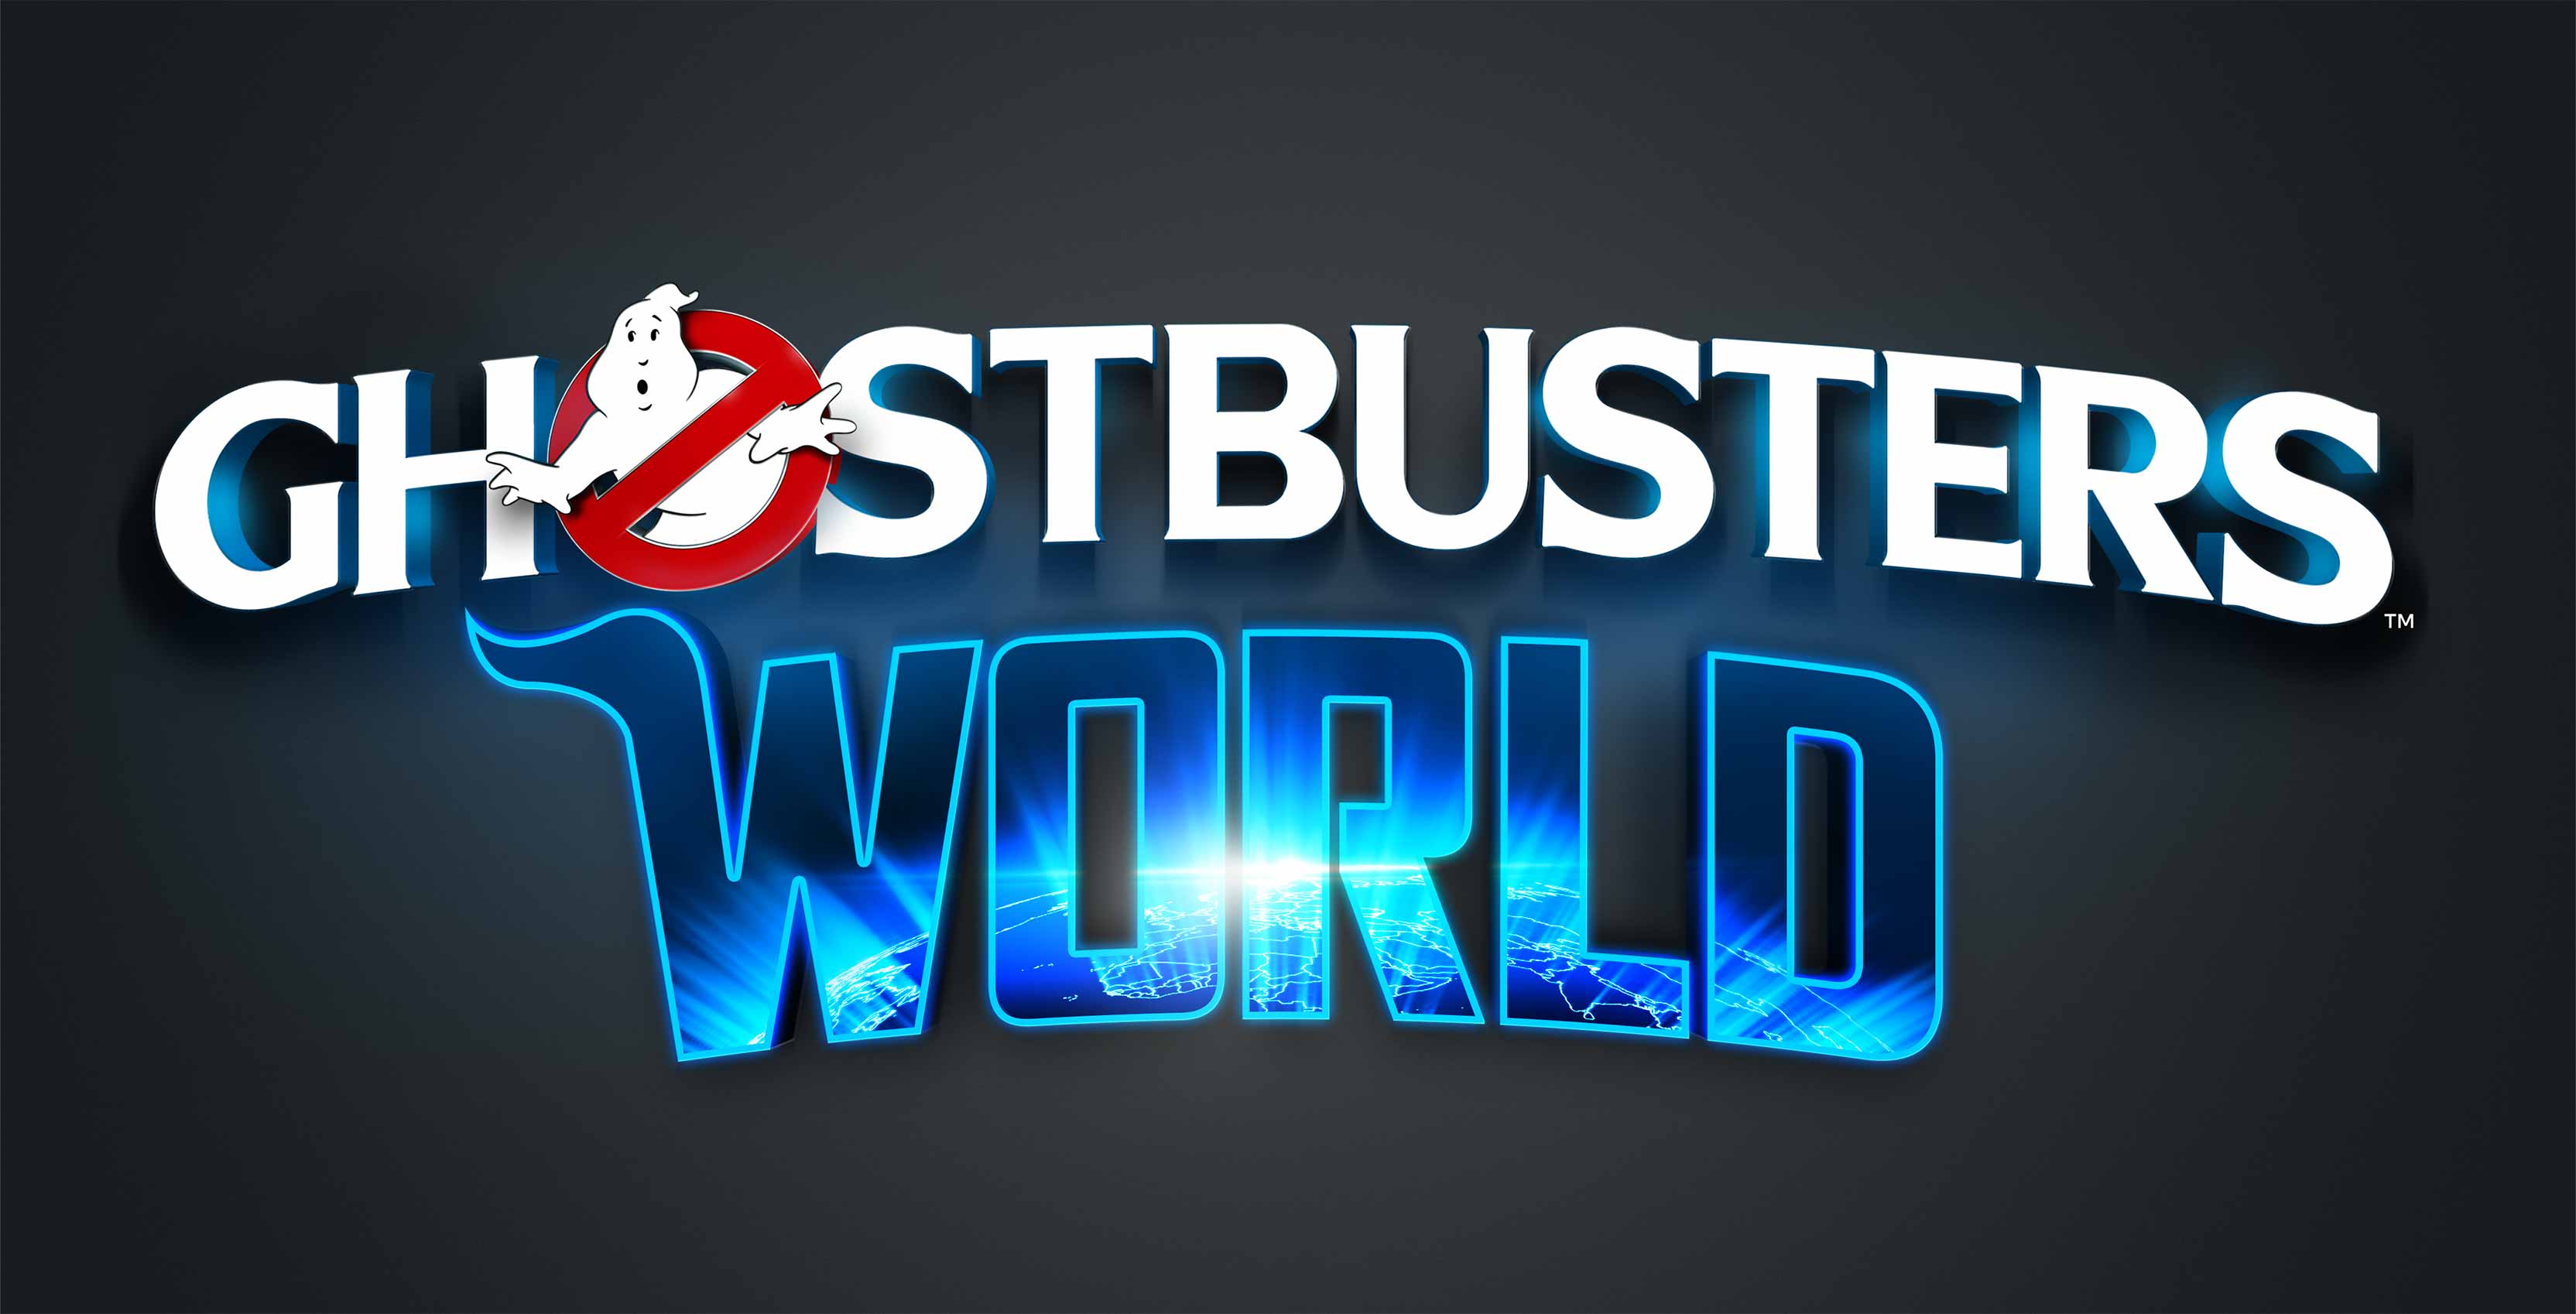 Ghostbusters World mobile game logo